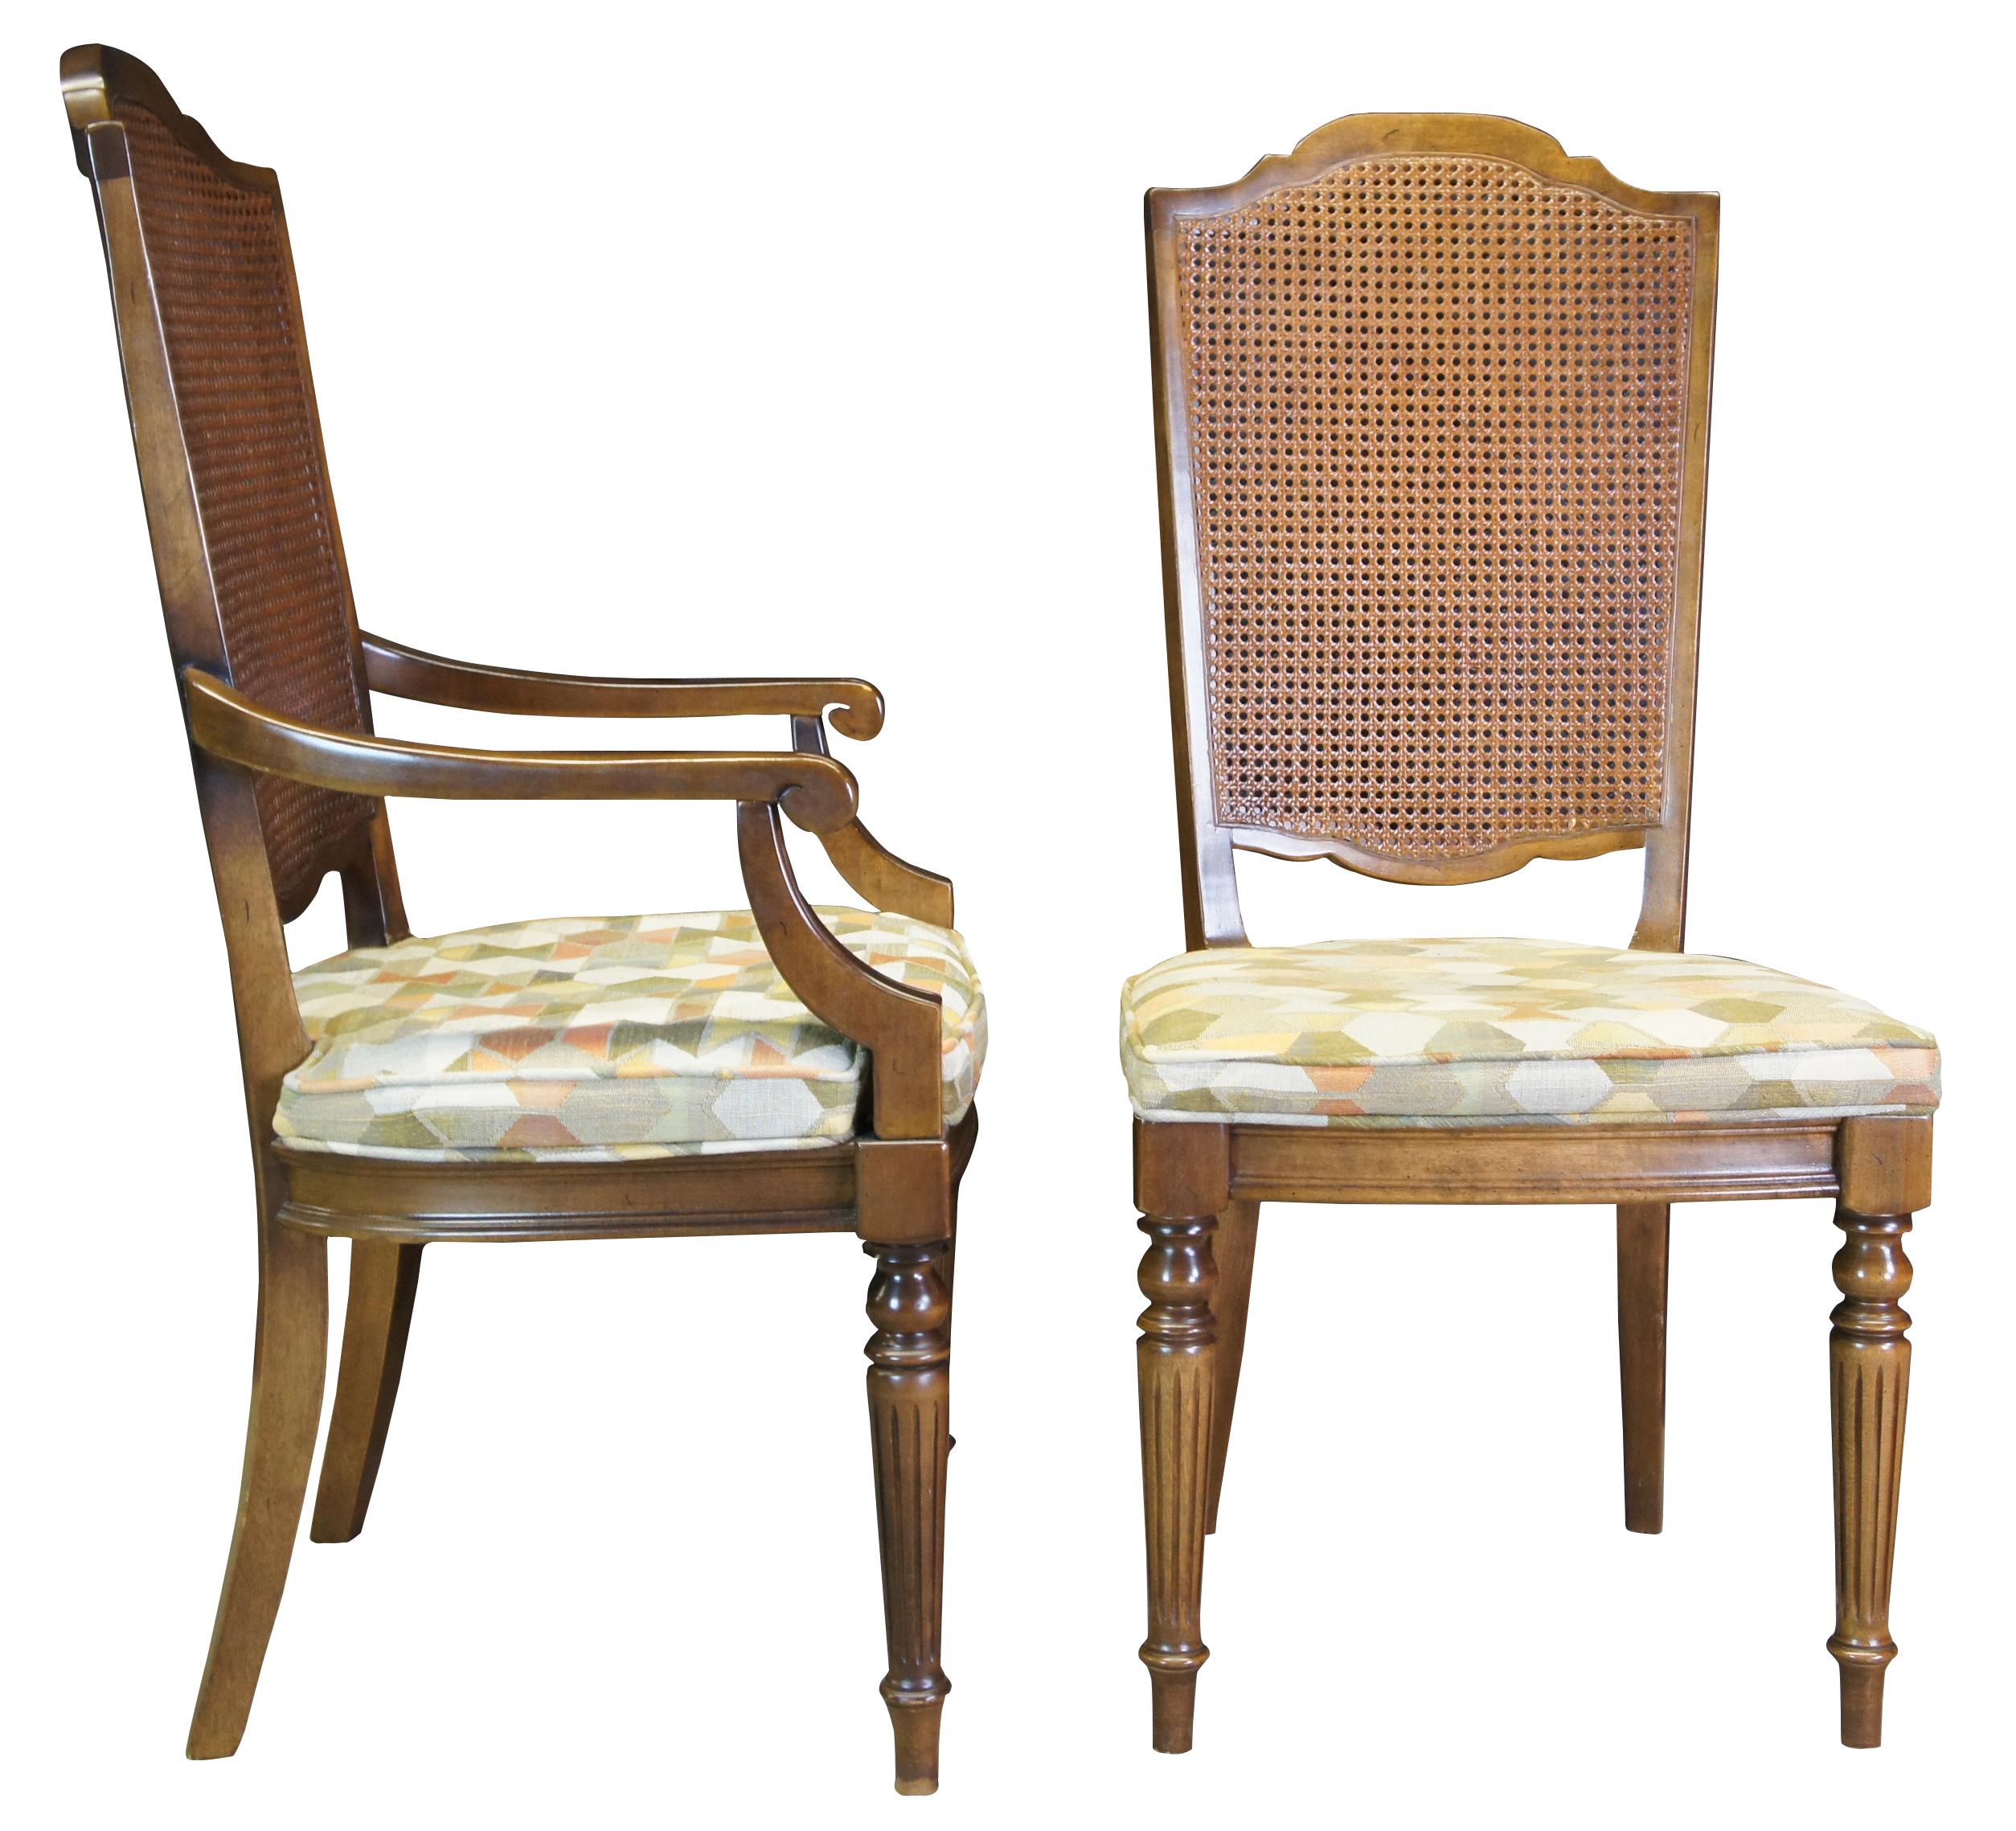 Six Vintage Ethan Allen Classis Manor dining chairs, circa 1970s. Made of solid maple featuring caned back with fluted and tapered accents and geometric / hexagon upholstery. Includes two arms and four sides. 15-6012. A rich blend of French Country